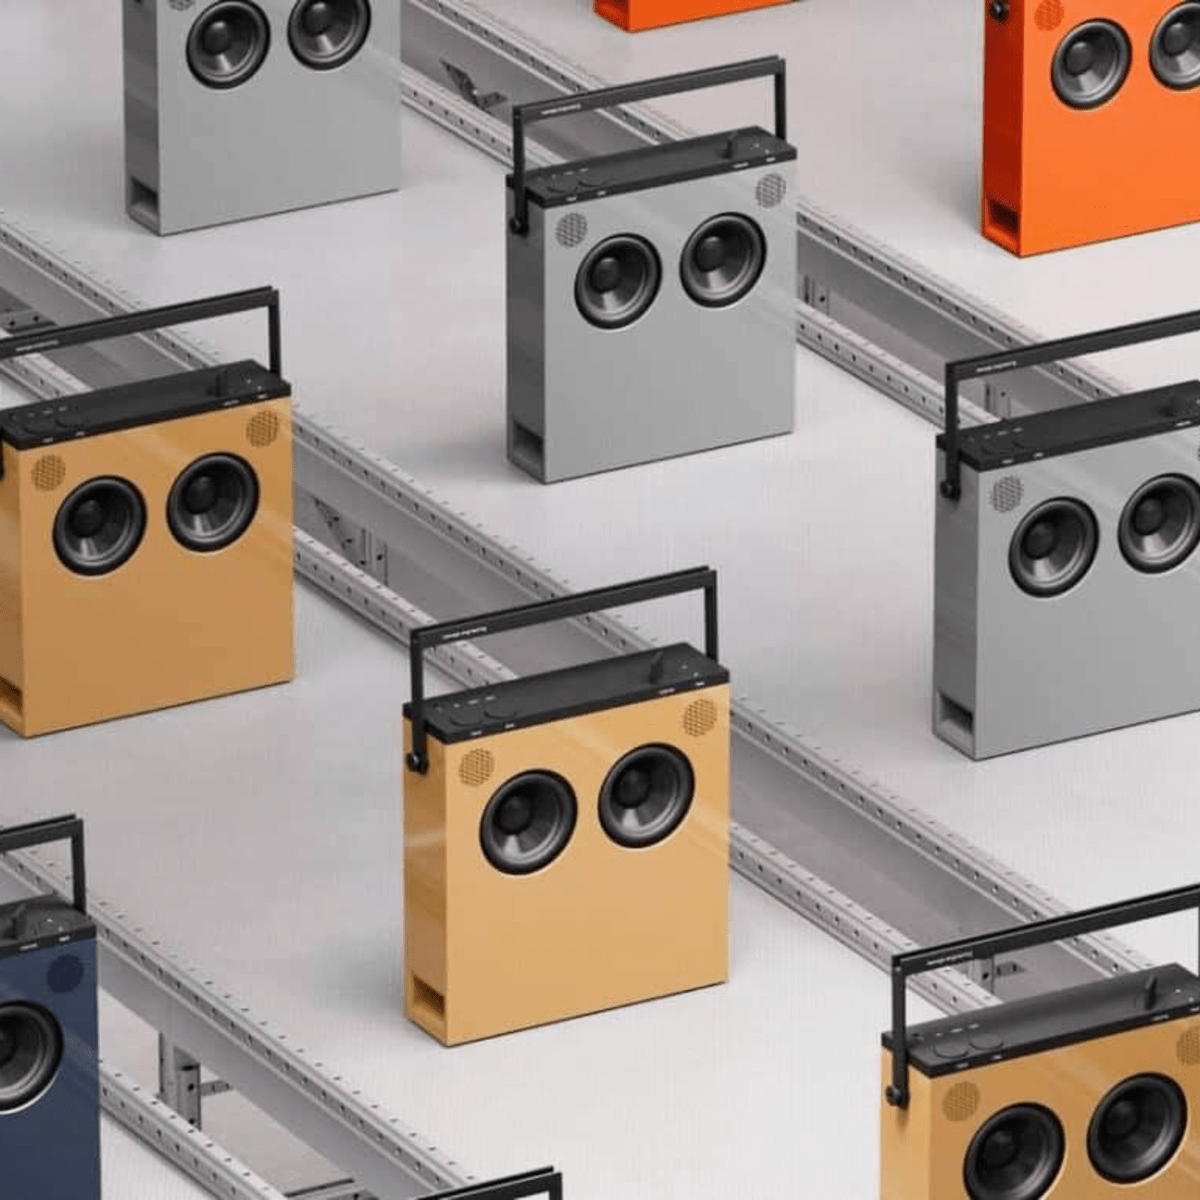 Teenage Engineering Launches New Colorways of the OB-4 - Airows